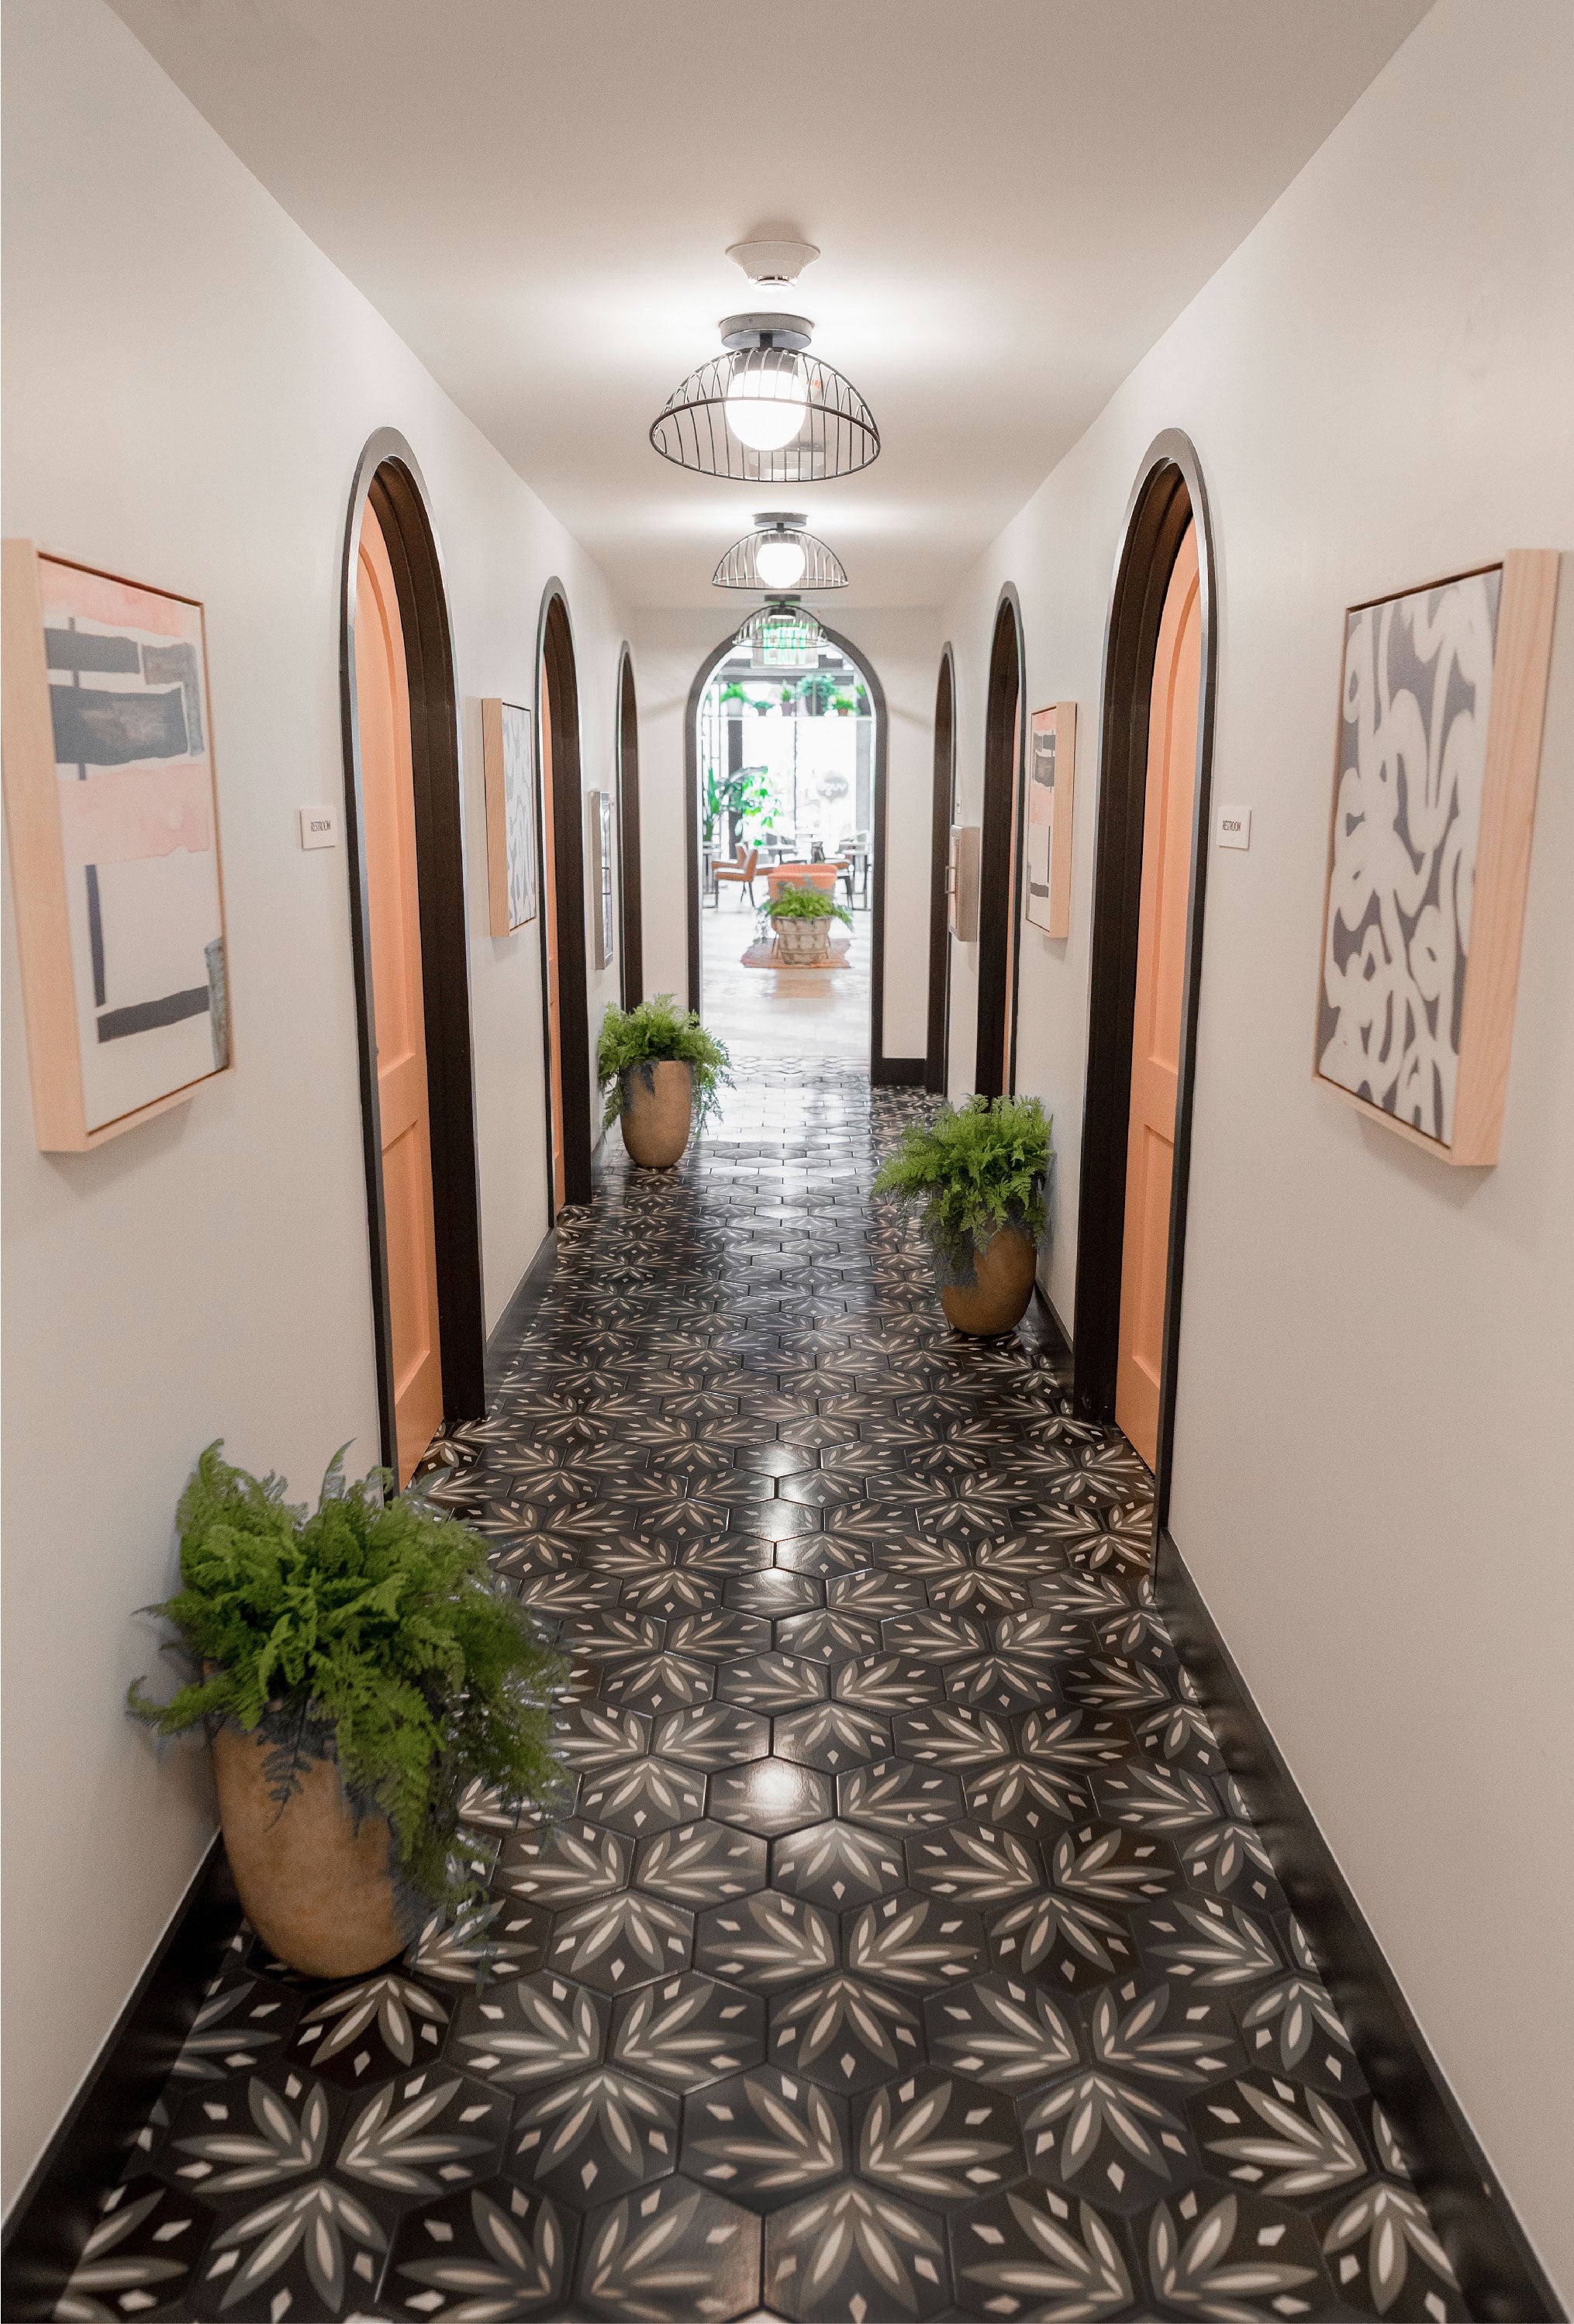 Hallway with pattern tile floor by clay imports